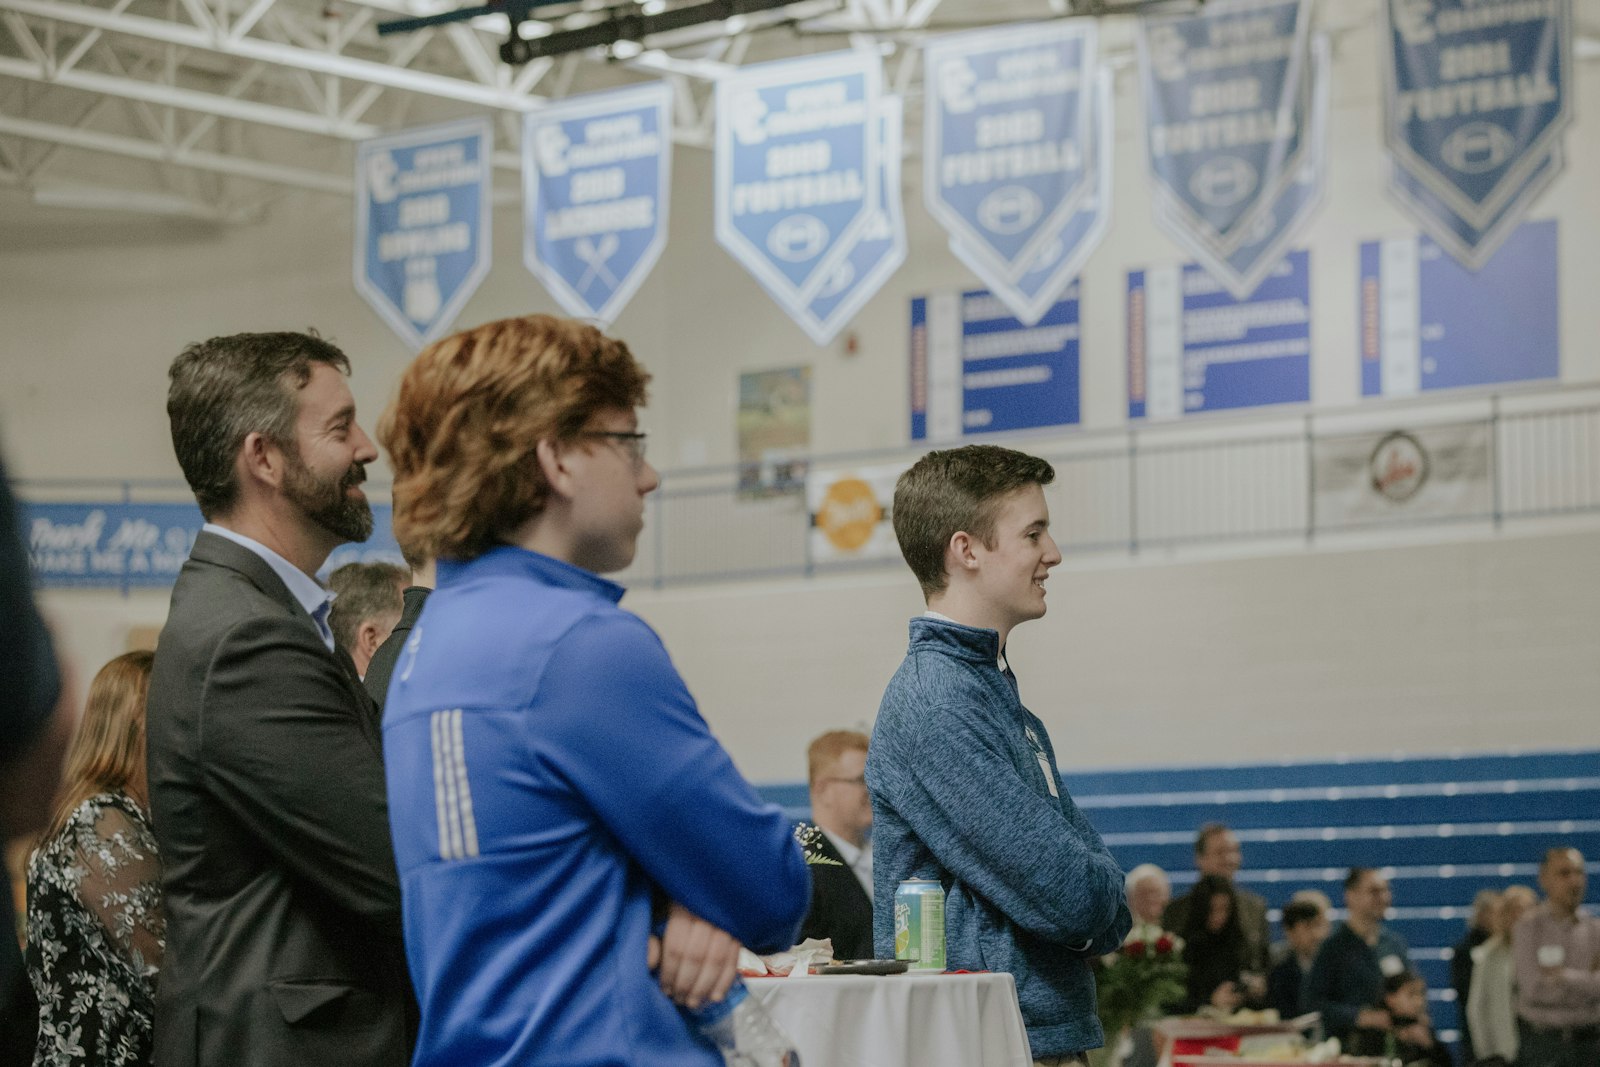 Catholic Central students and parents look on during a recognition ceremony Nov. 19 for members of the Congregation of St. Basil at Catholic Central High School in Novi.